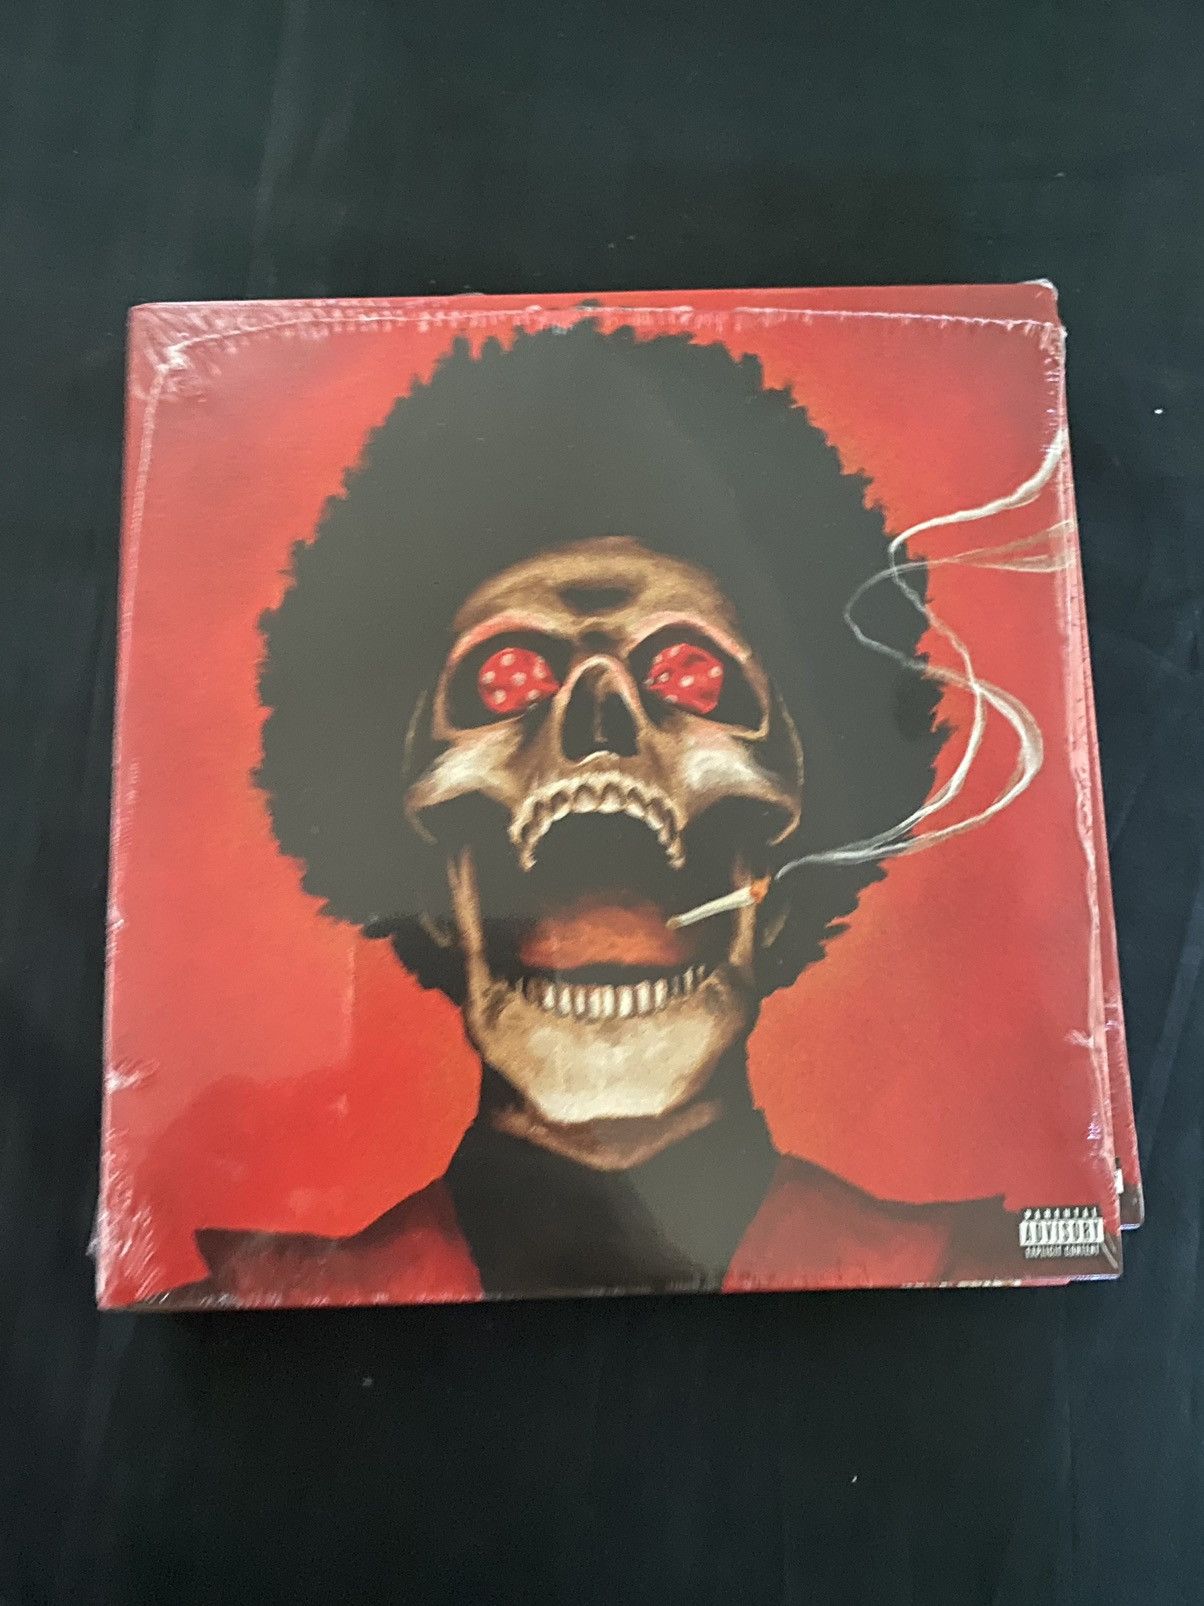 The Weeknd - Blinding Lights Limited LP